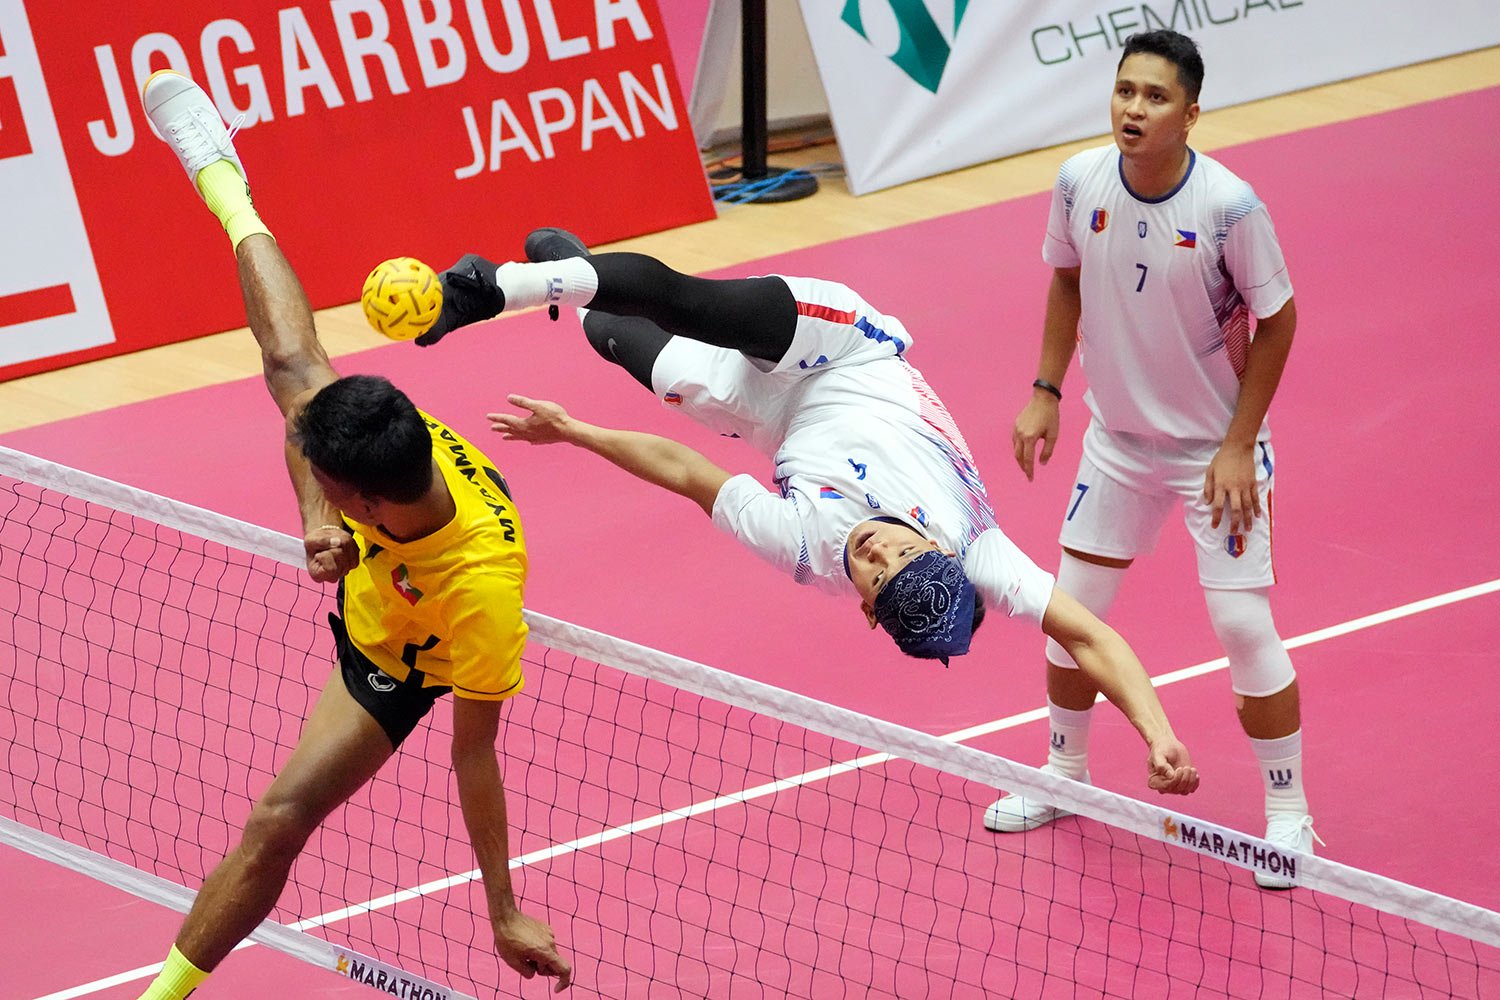  RheyJey C. Ortouste of the Philippines, center, kicks a ball against Kyaw Zin Latt of Myanmar, left, during the men's sepaktakraw regu match at the 31st Southeast Asian Games (SEA Games 31) in Hanoi, Vietnam, Tuesday, May 17, 2022. (AP Photo/Achmad 